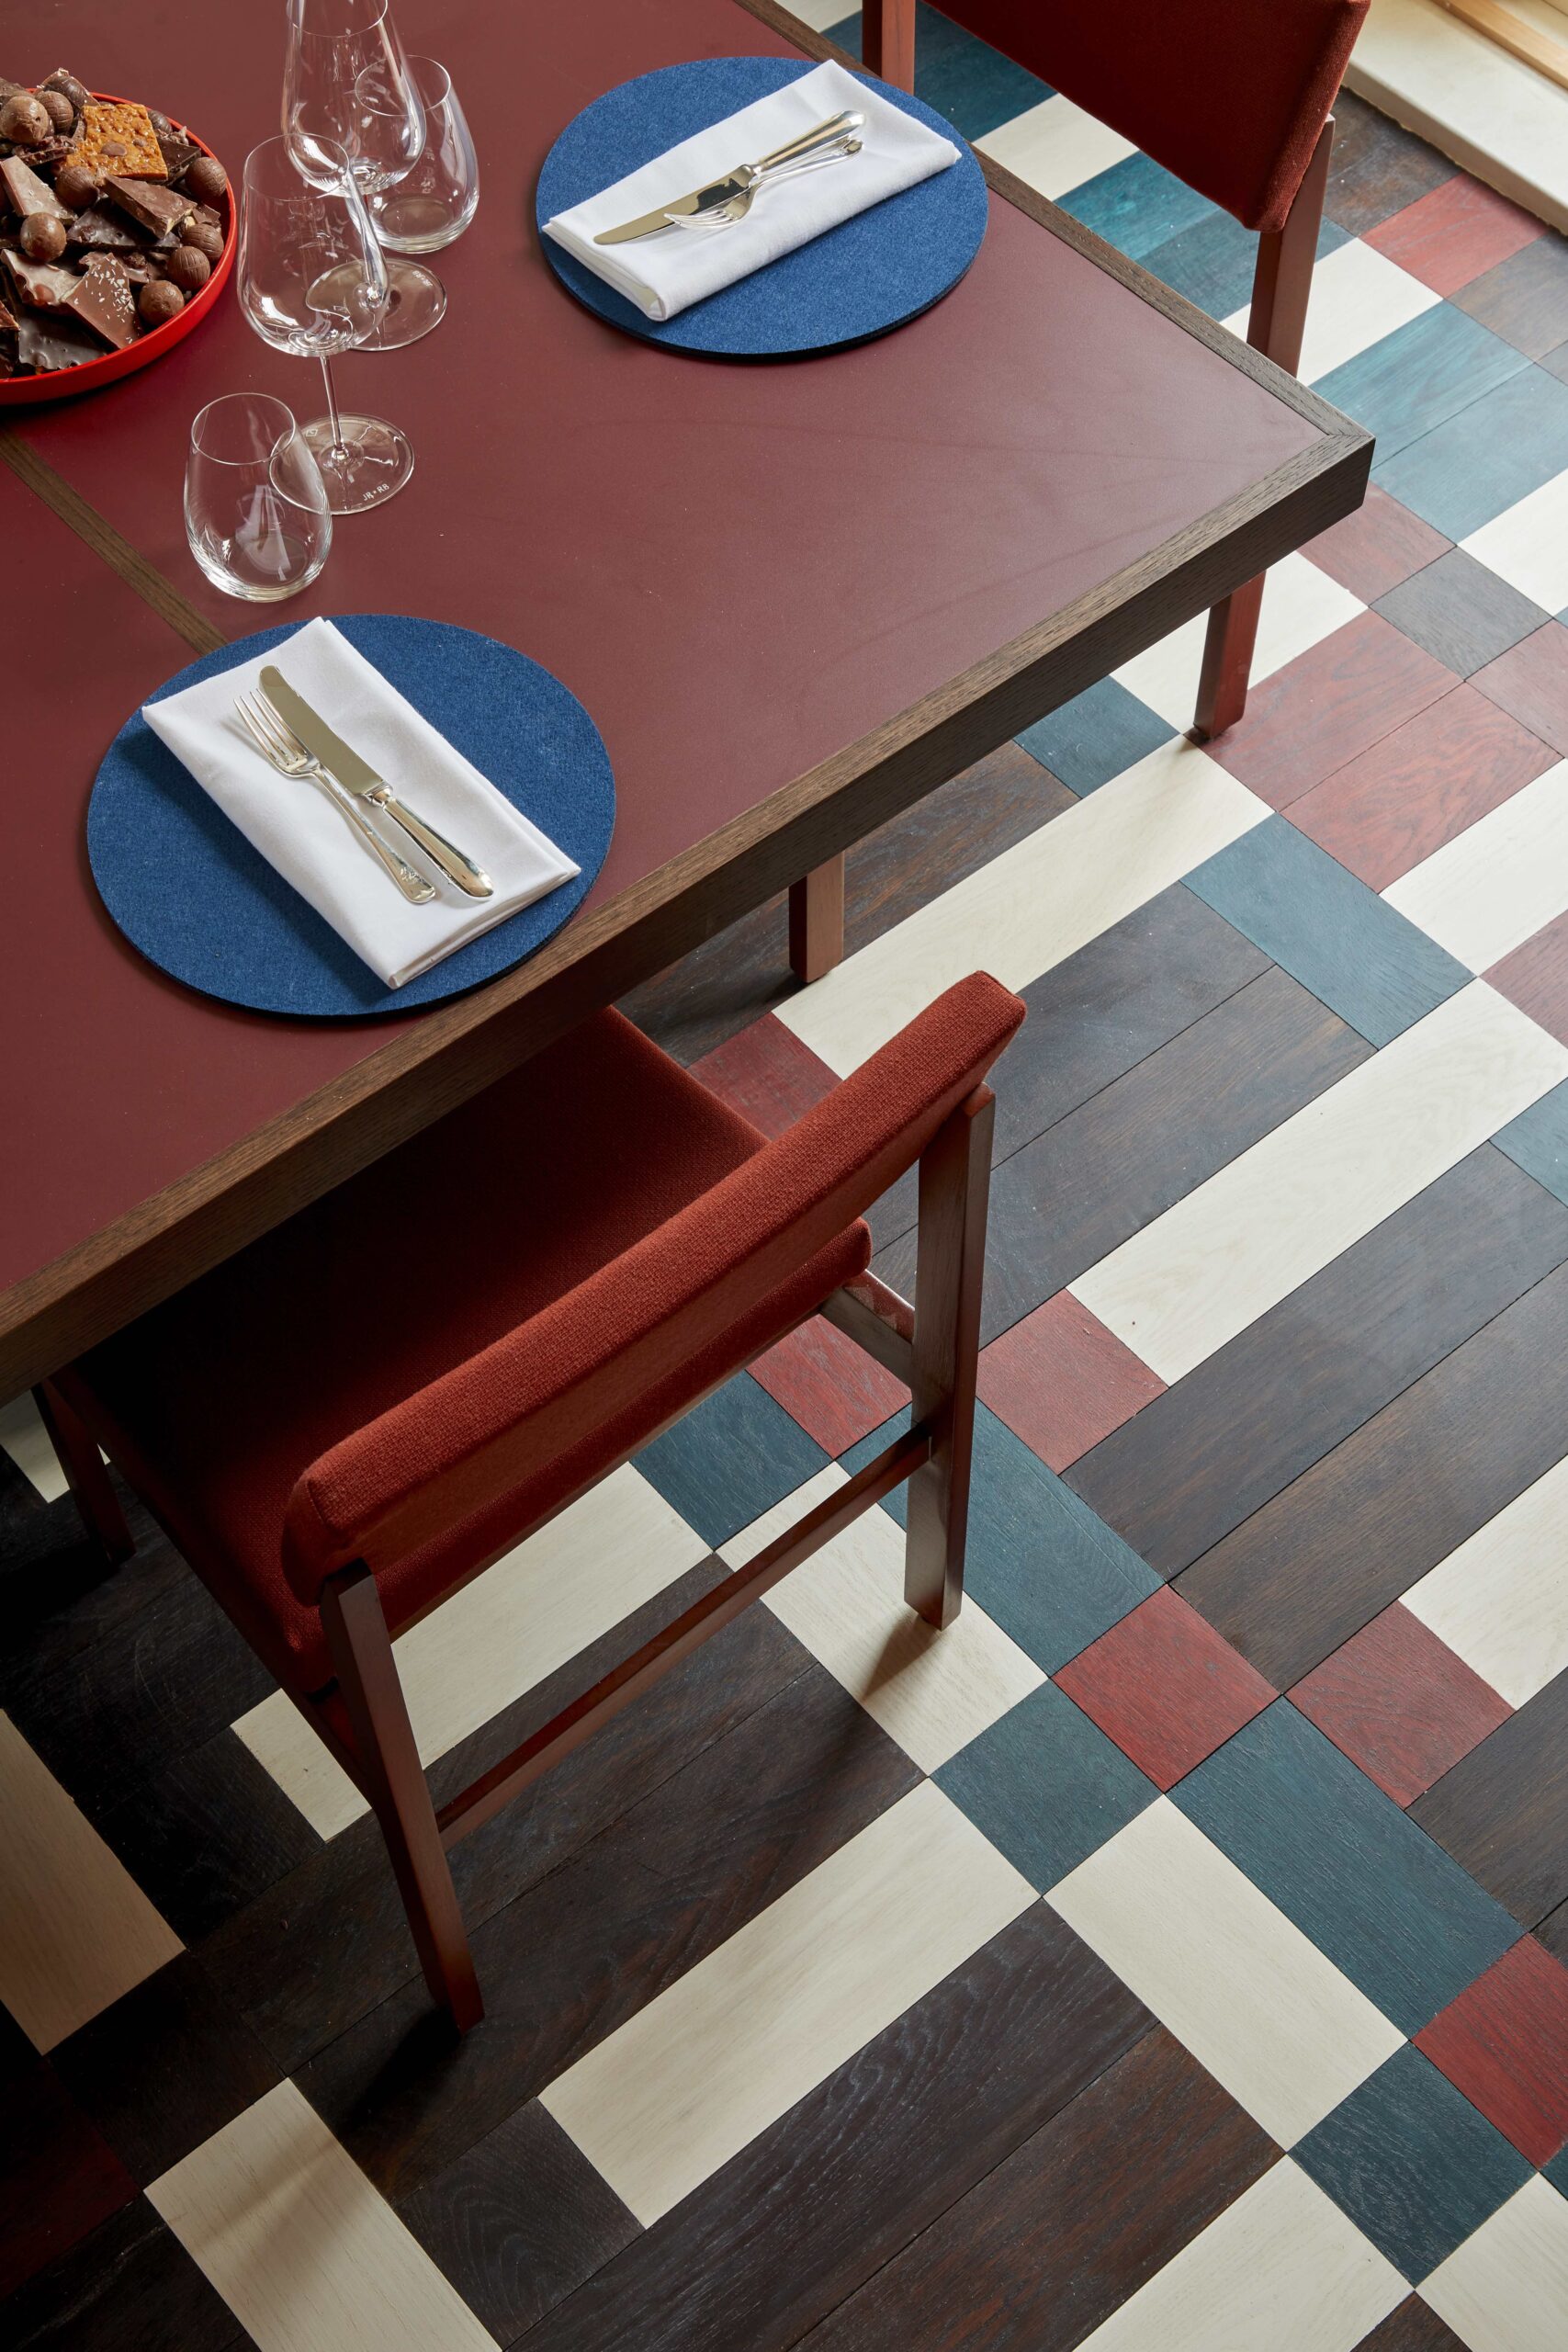 A burgundy set of tables and chairs on a multi patterned floor